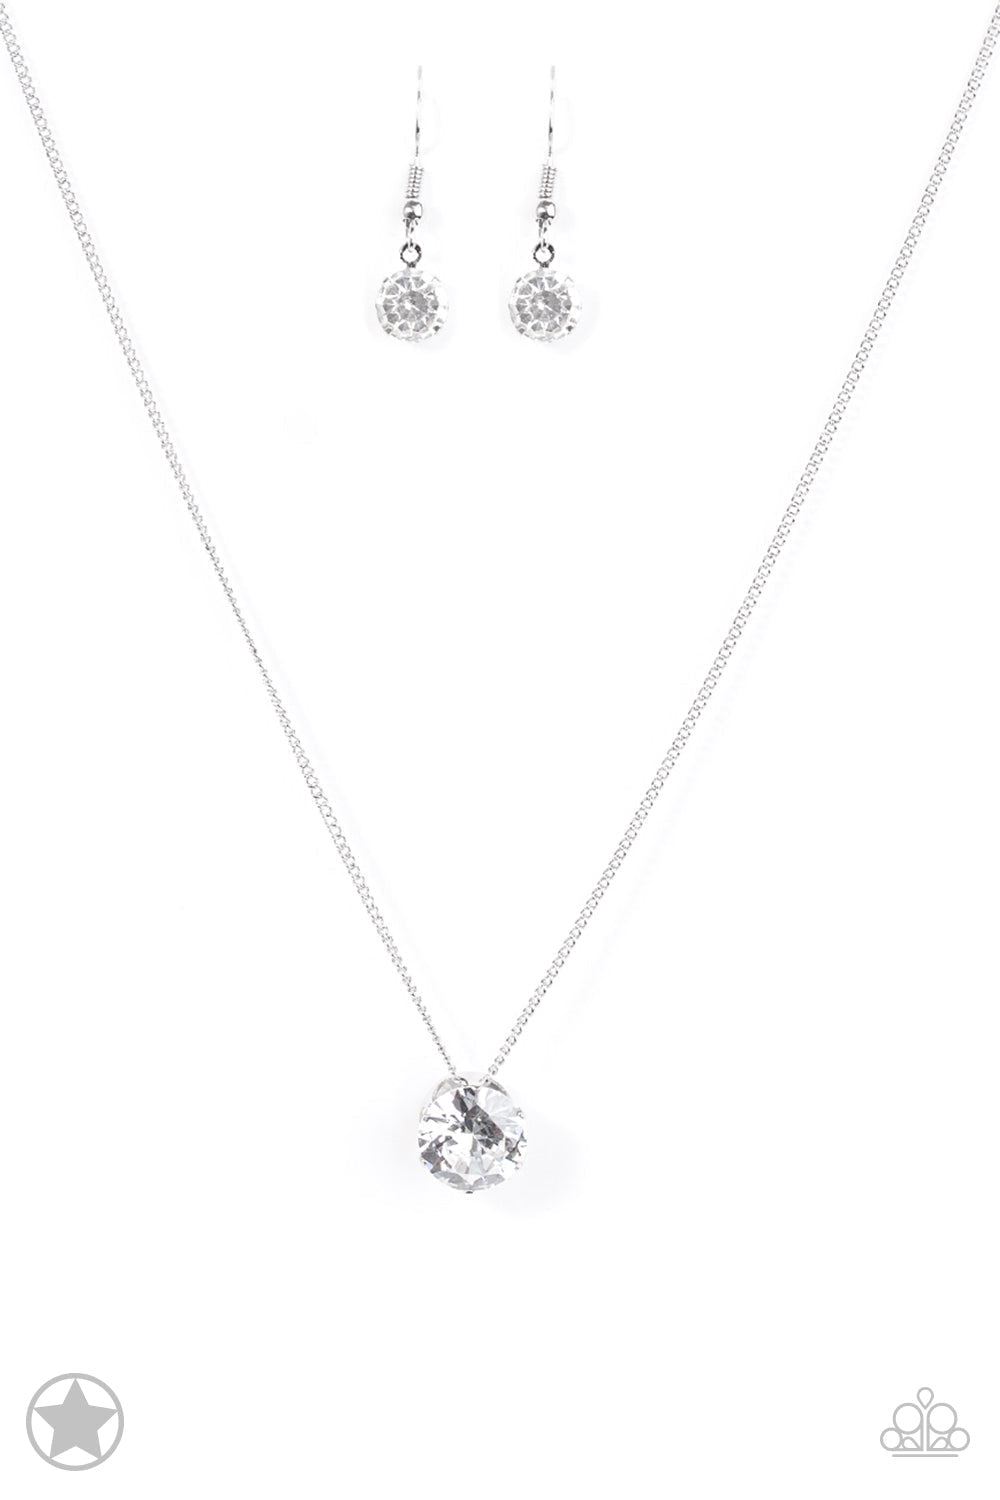 What A Gem - White and Silver Necklace - Paparazzi Accessories - A single rhinestone sparkles brilliantly at the bottom of a dainty silver chain, creating a stunning solitaire design.